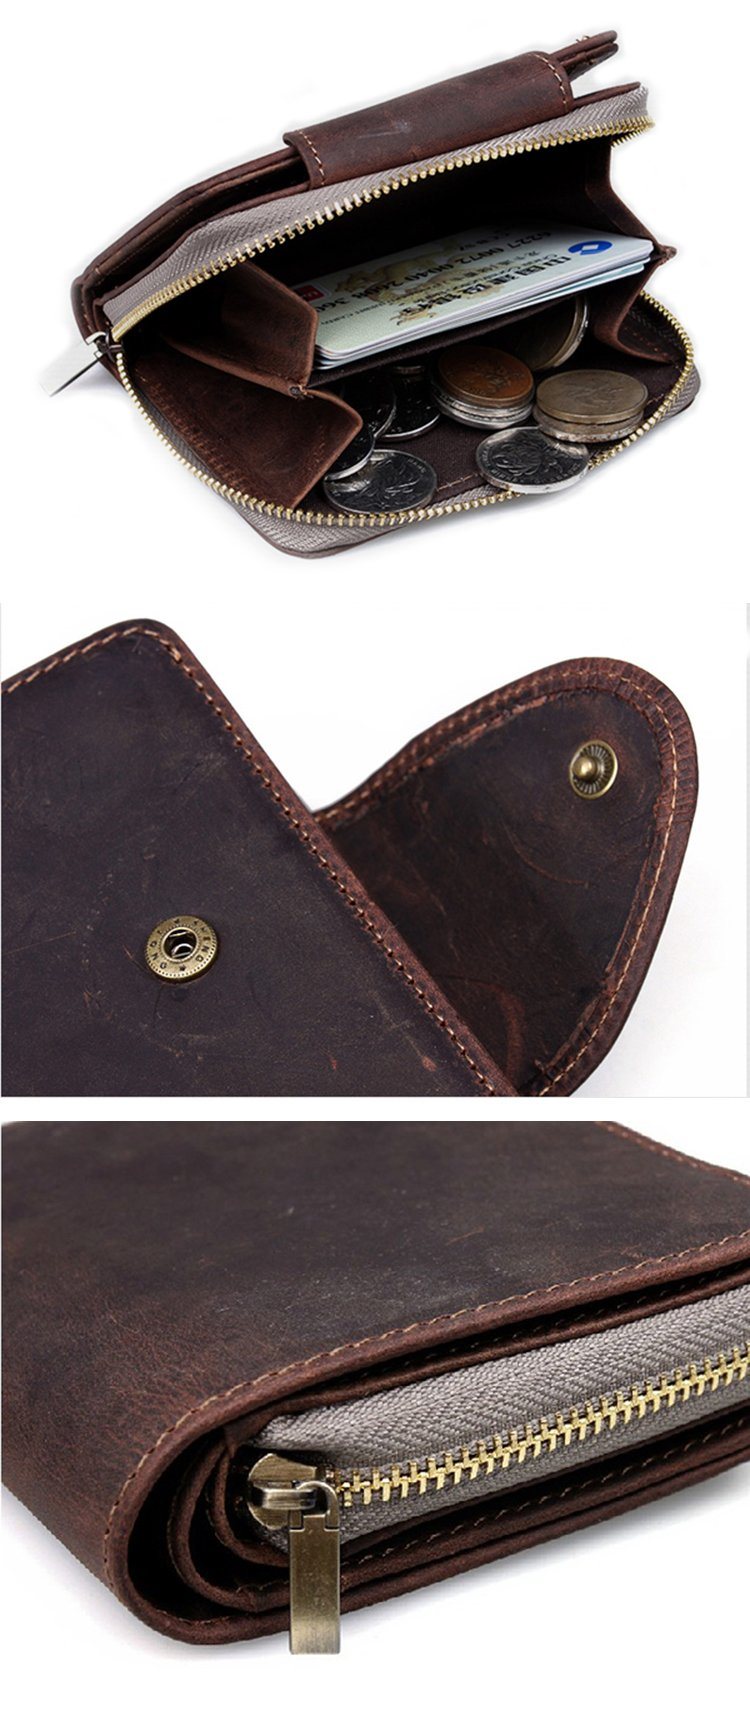 Hot Selling Factory Price Retro Style Brown Leather Coin Holder Leather Wallet